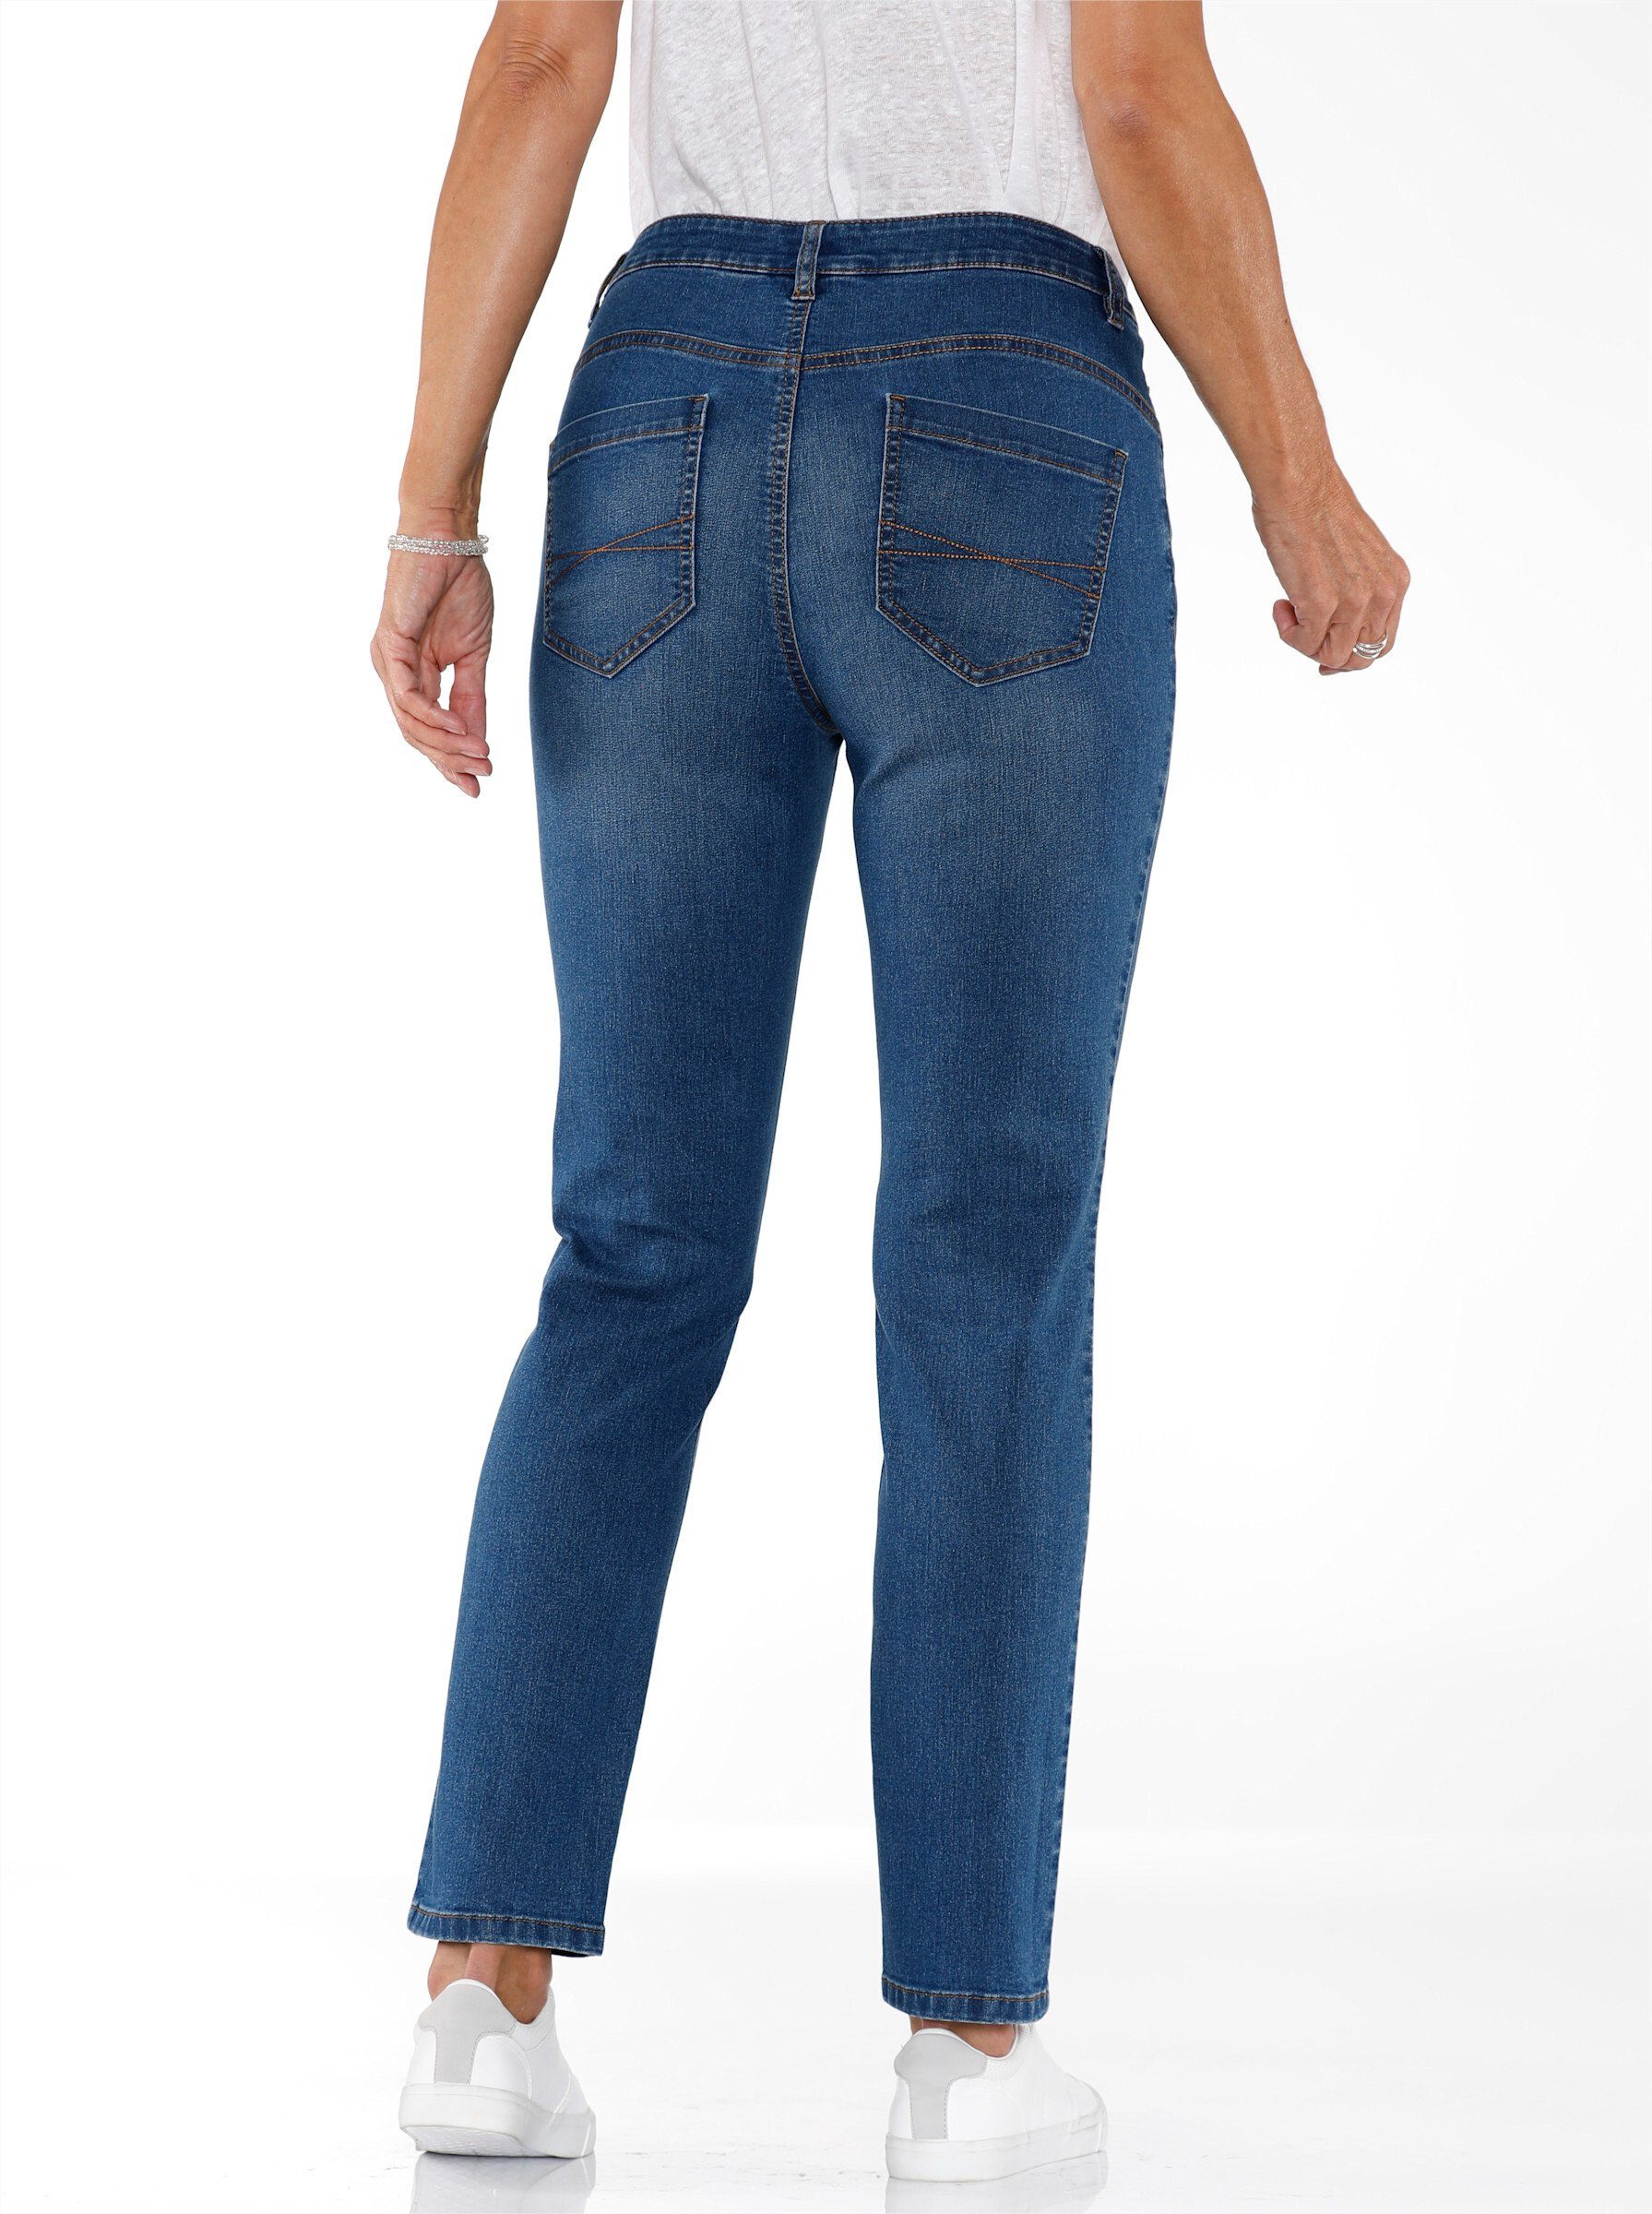 Sieh Jeans Bequeme blue-stone-washed an!